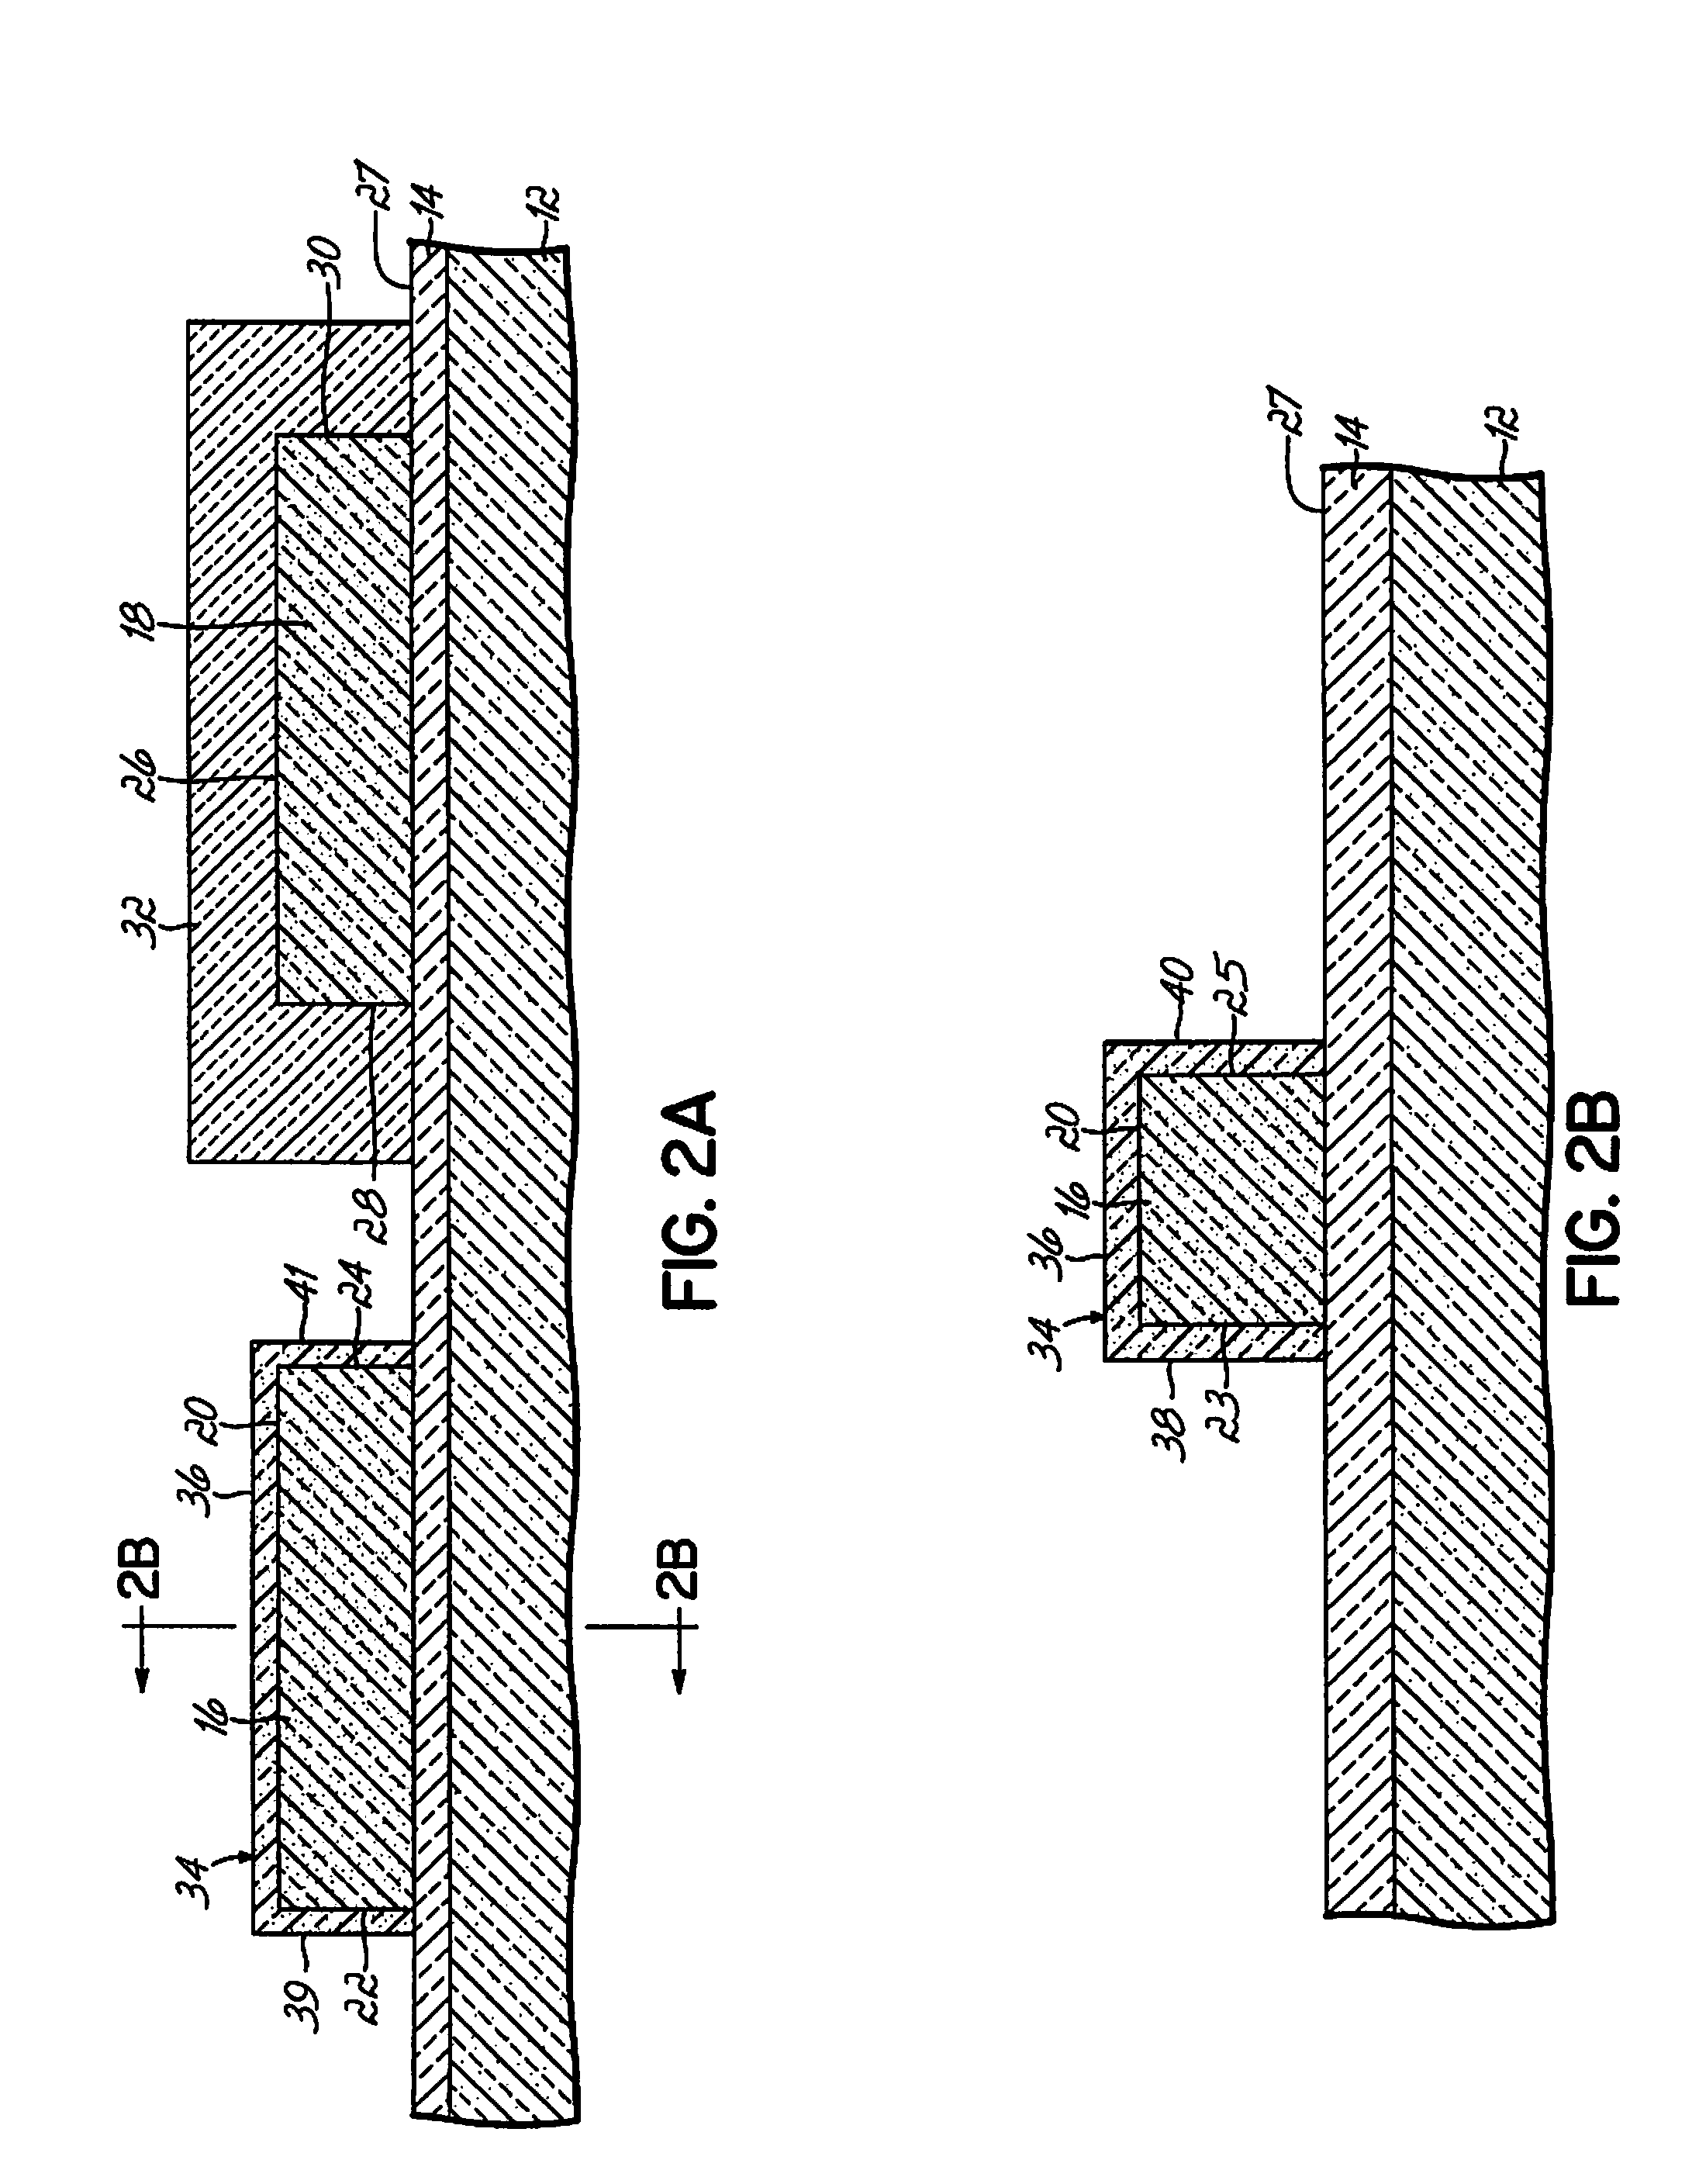 Hybrid Field Effect Transistor and Bipolar Junction Transistor Structures and Methods for Fabricating Such Structures